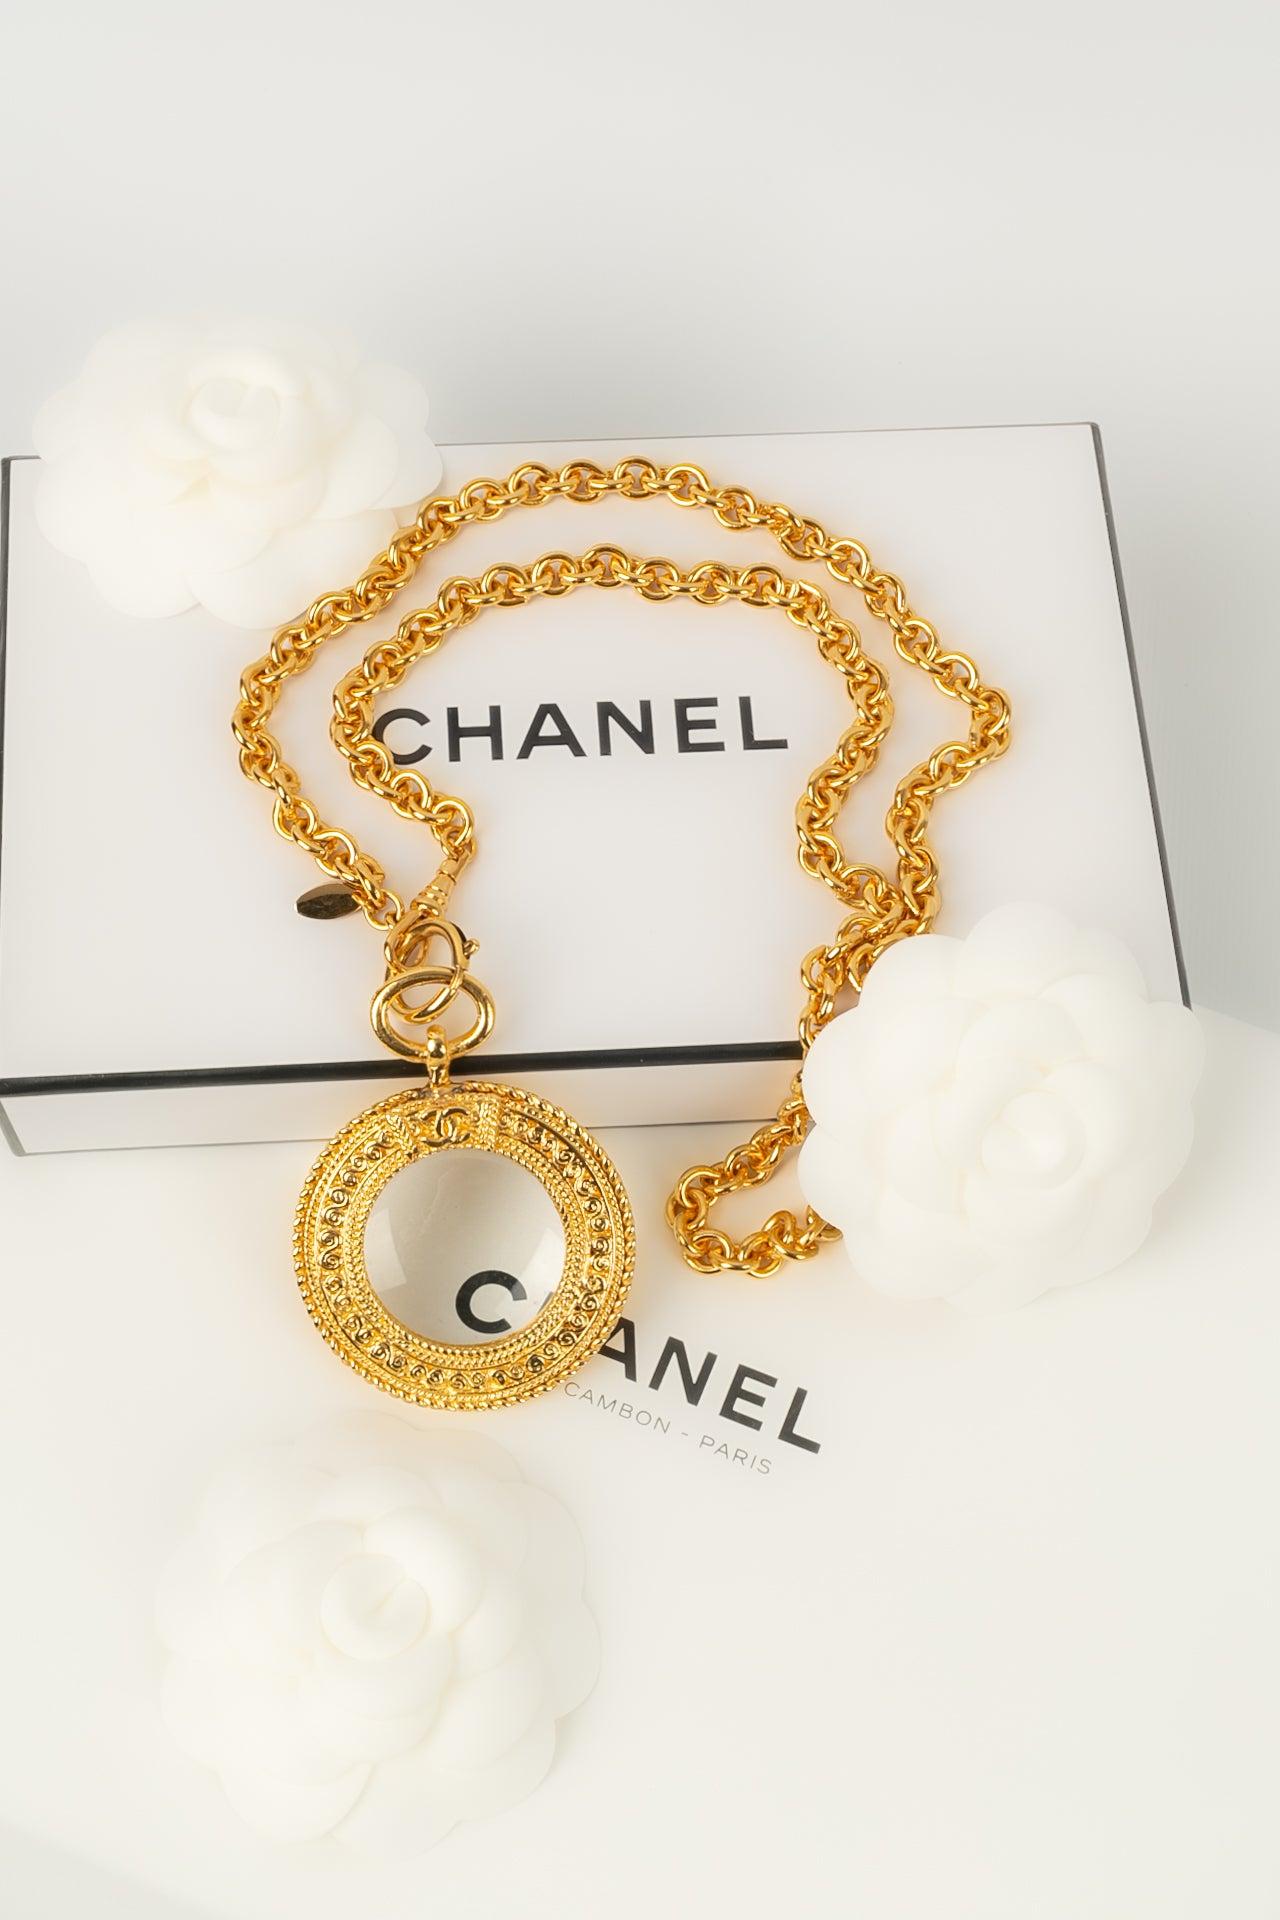 Chanel - (Made in France) Gold-plated metal necklace and burr pendant. Jewel from the 1980s.

Additional information:
Dimensions: Length: 70 cm - Diameter of the magnifying glass: 5.5 cm
Condition: Very good condition
Seller Ref number: CB24